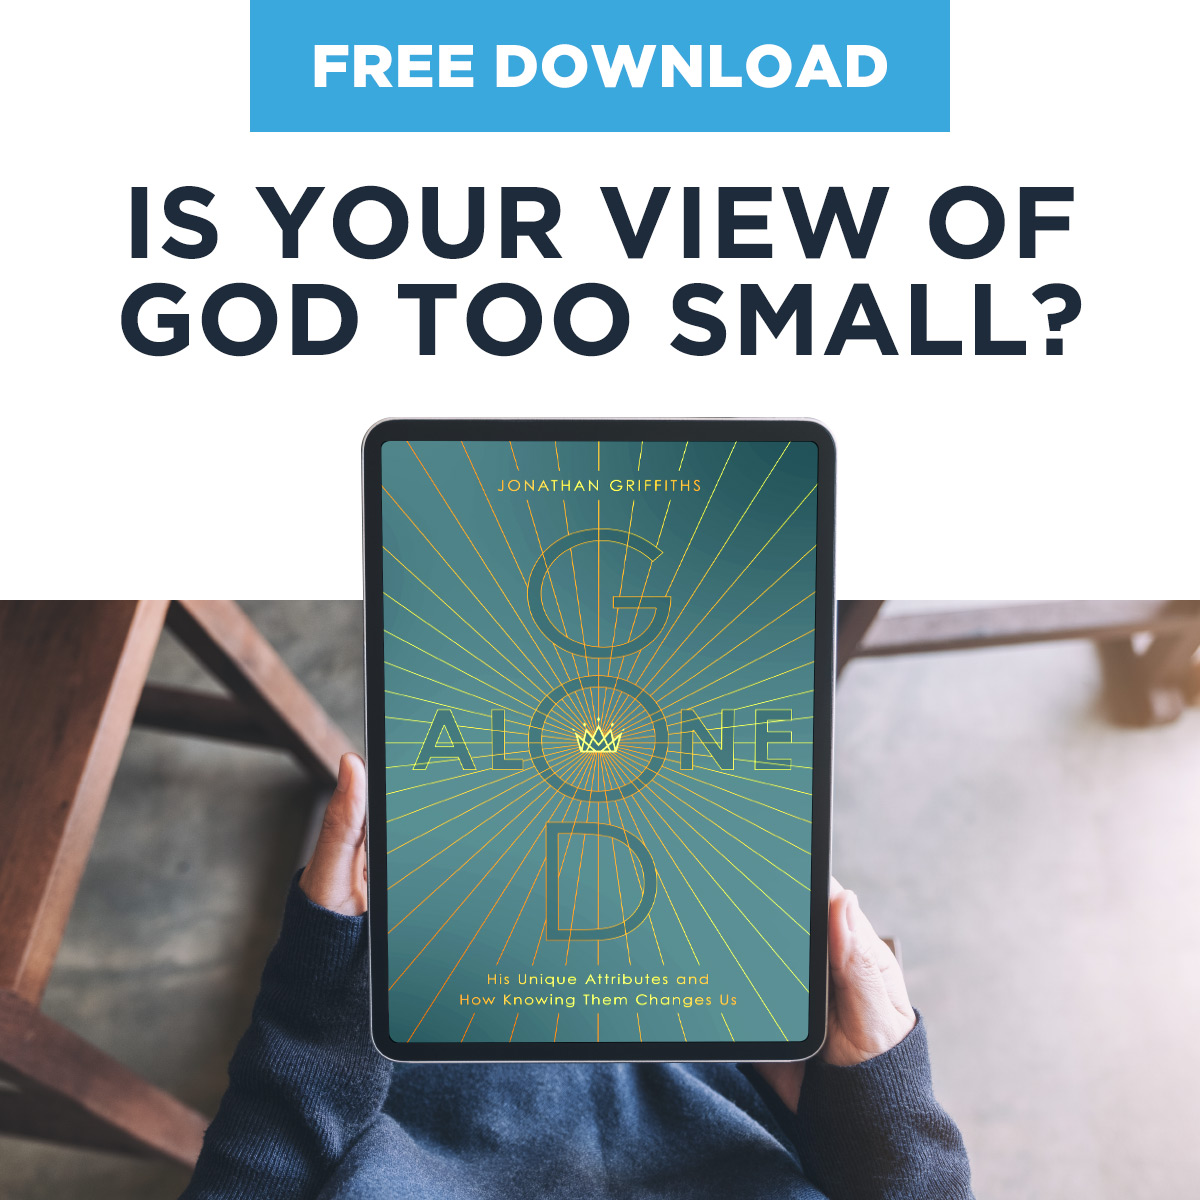 Is Your View of God too Small?